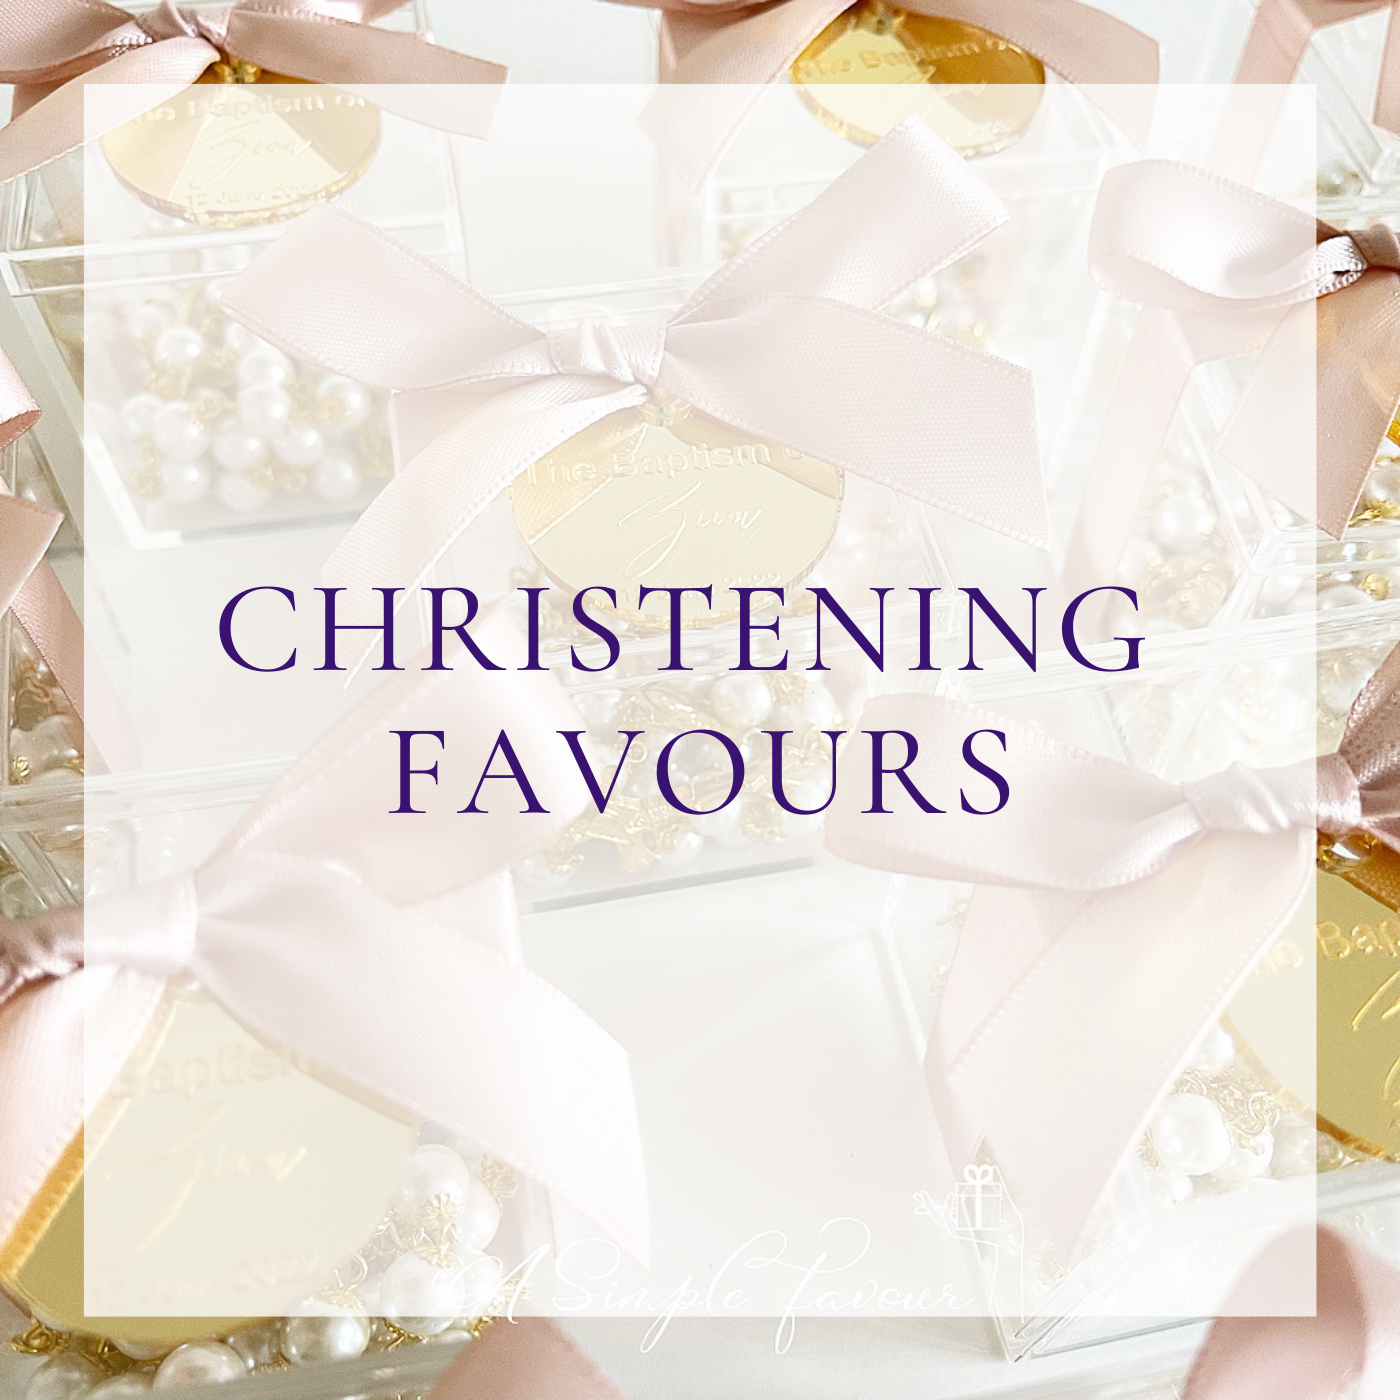 Christening Favours